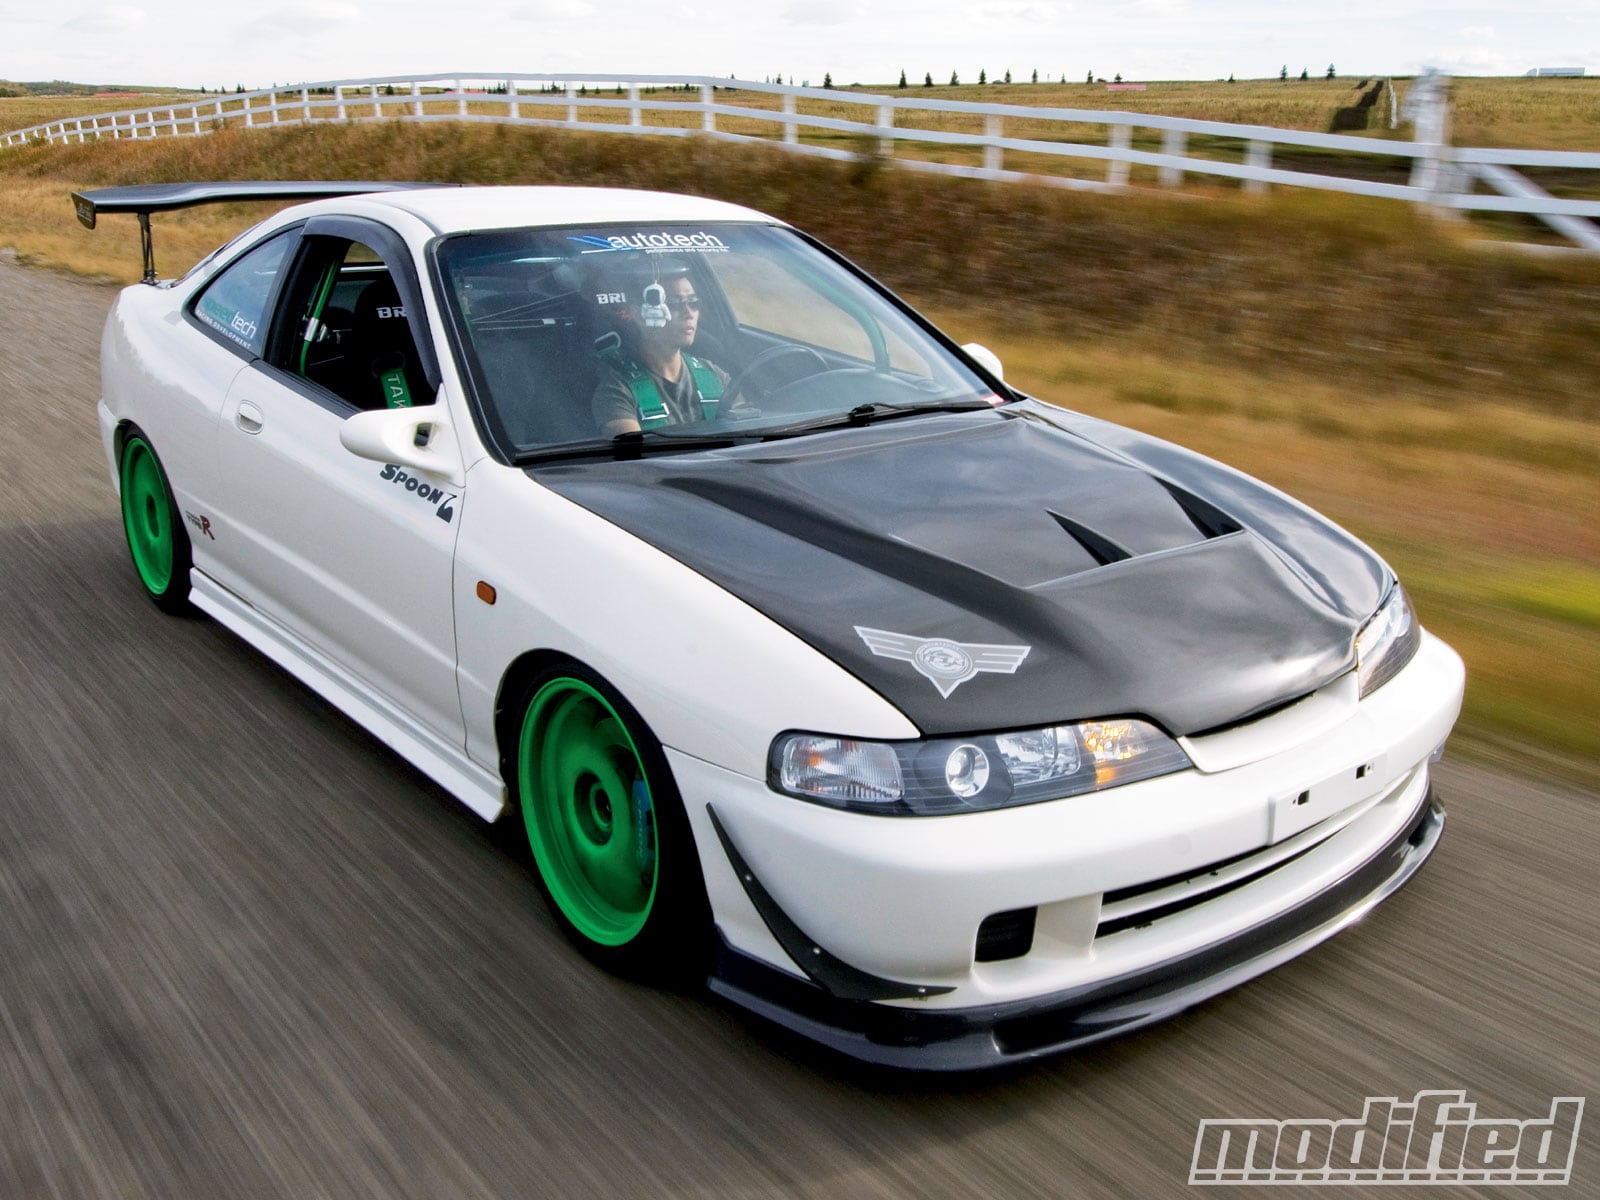 1998 Acura Integra Type-R - Can't Stop Won't Stop